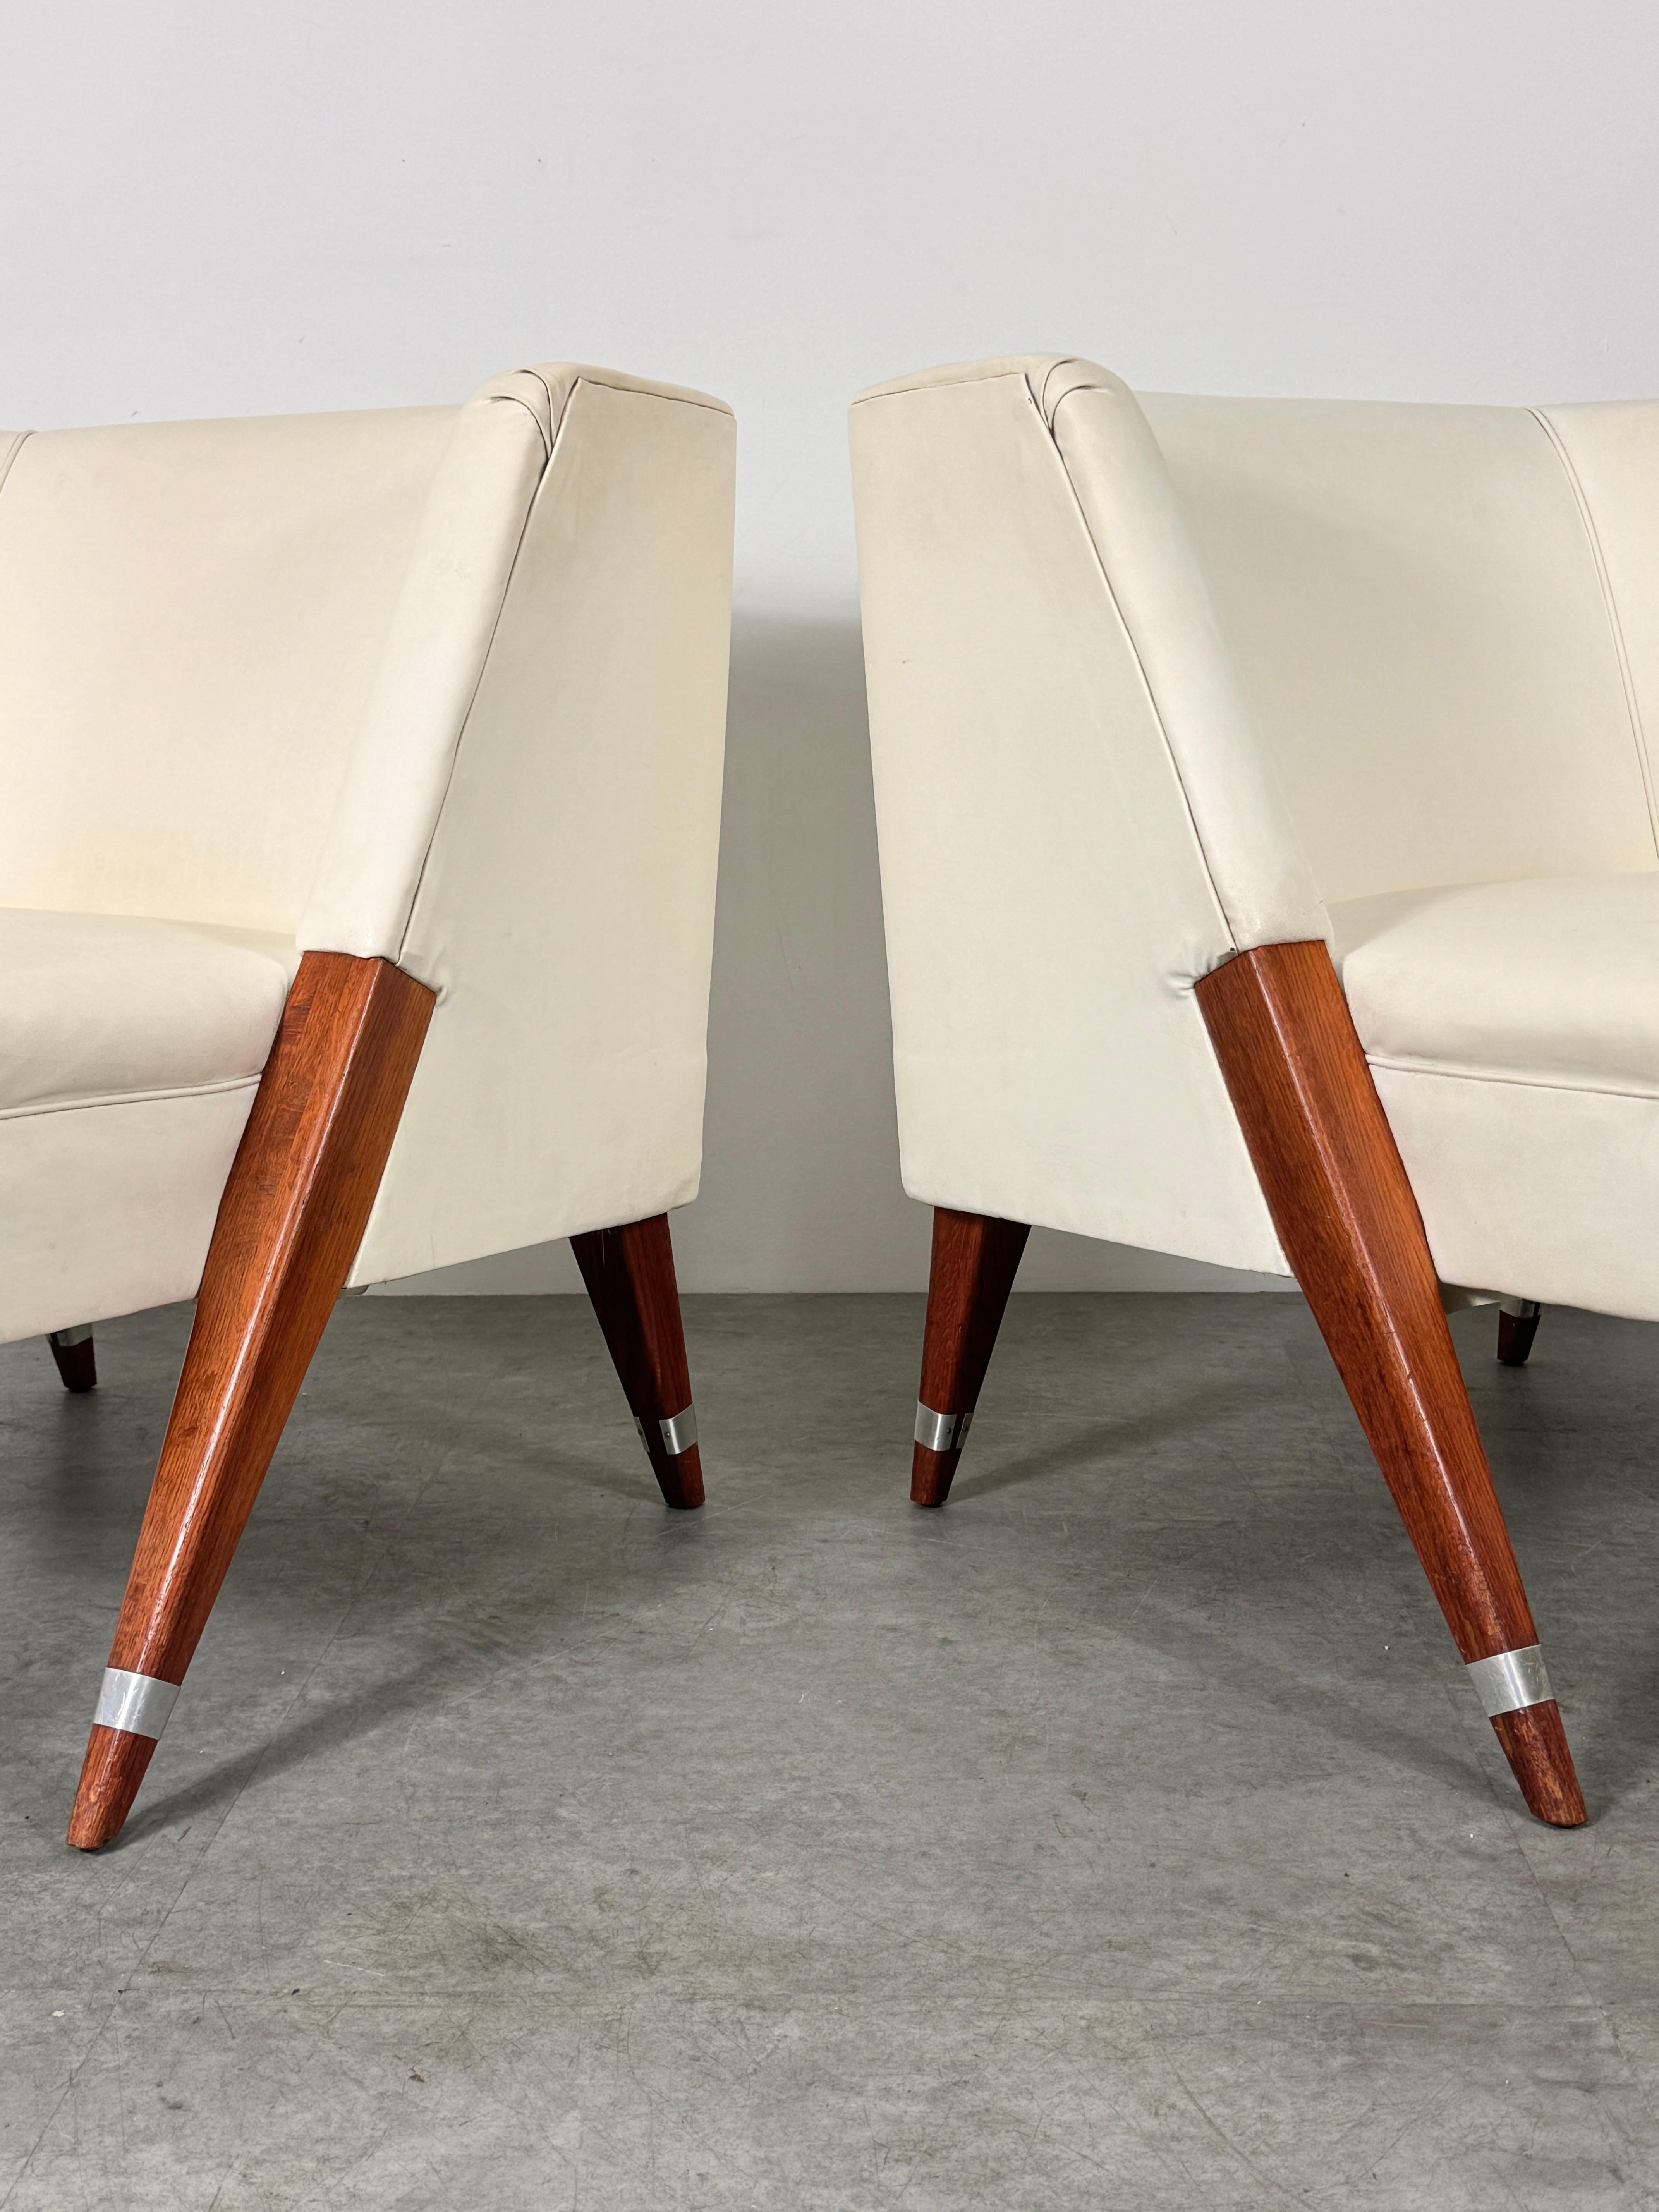 Pair Mid Century Modern Walnut Lounge Chairs In the Style of Gio Ponti 1950s In Fair Condition For Sale In Troy, MI